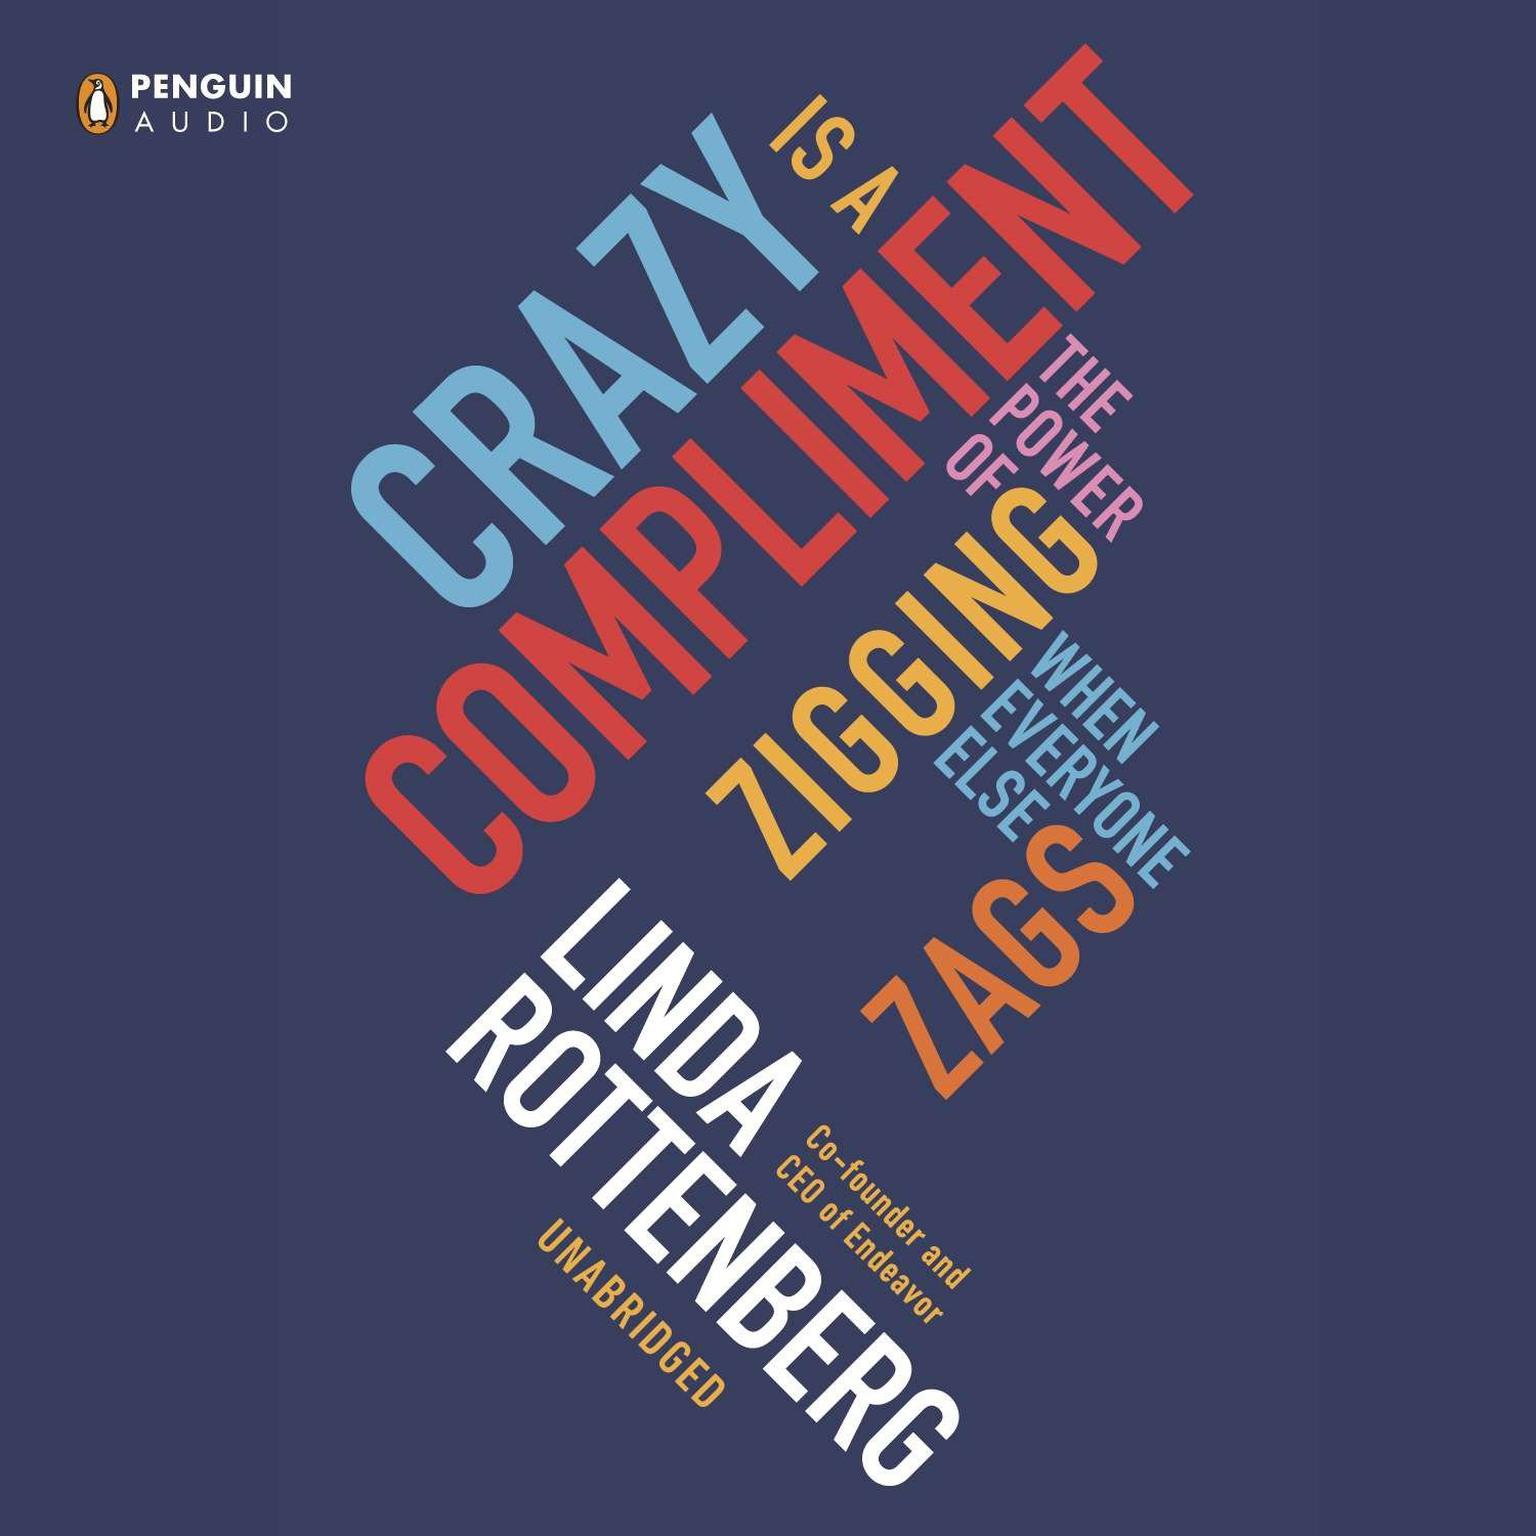 Crazy Is a Compliment: The Power of Zigging When Everyone Else Zags Audiobook, by Linda Rottenberg